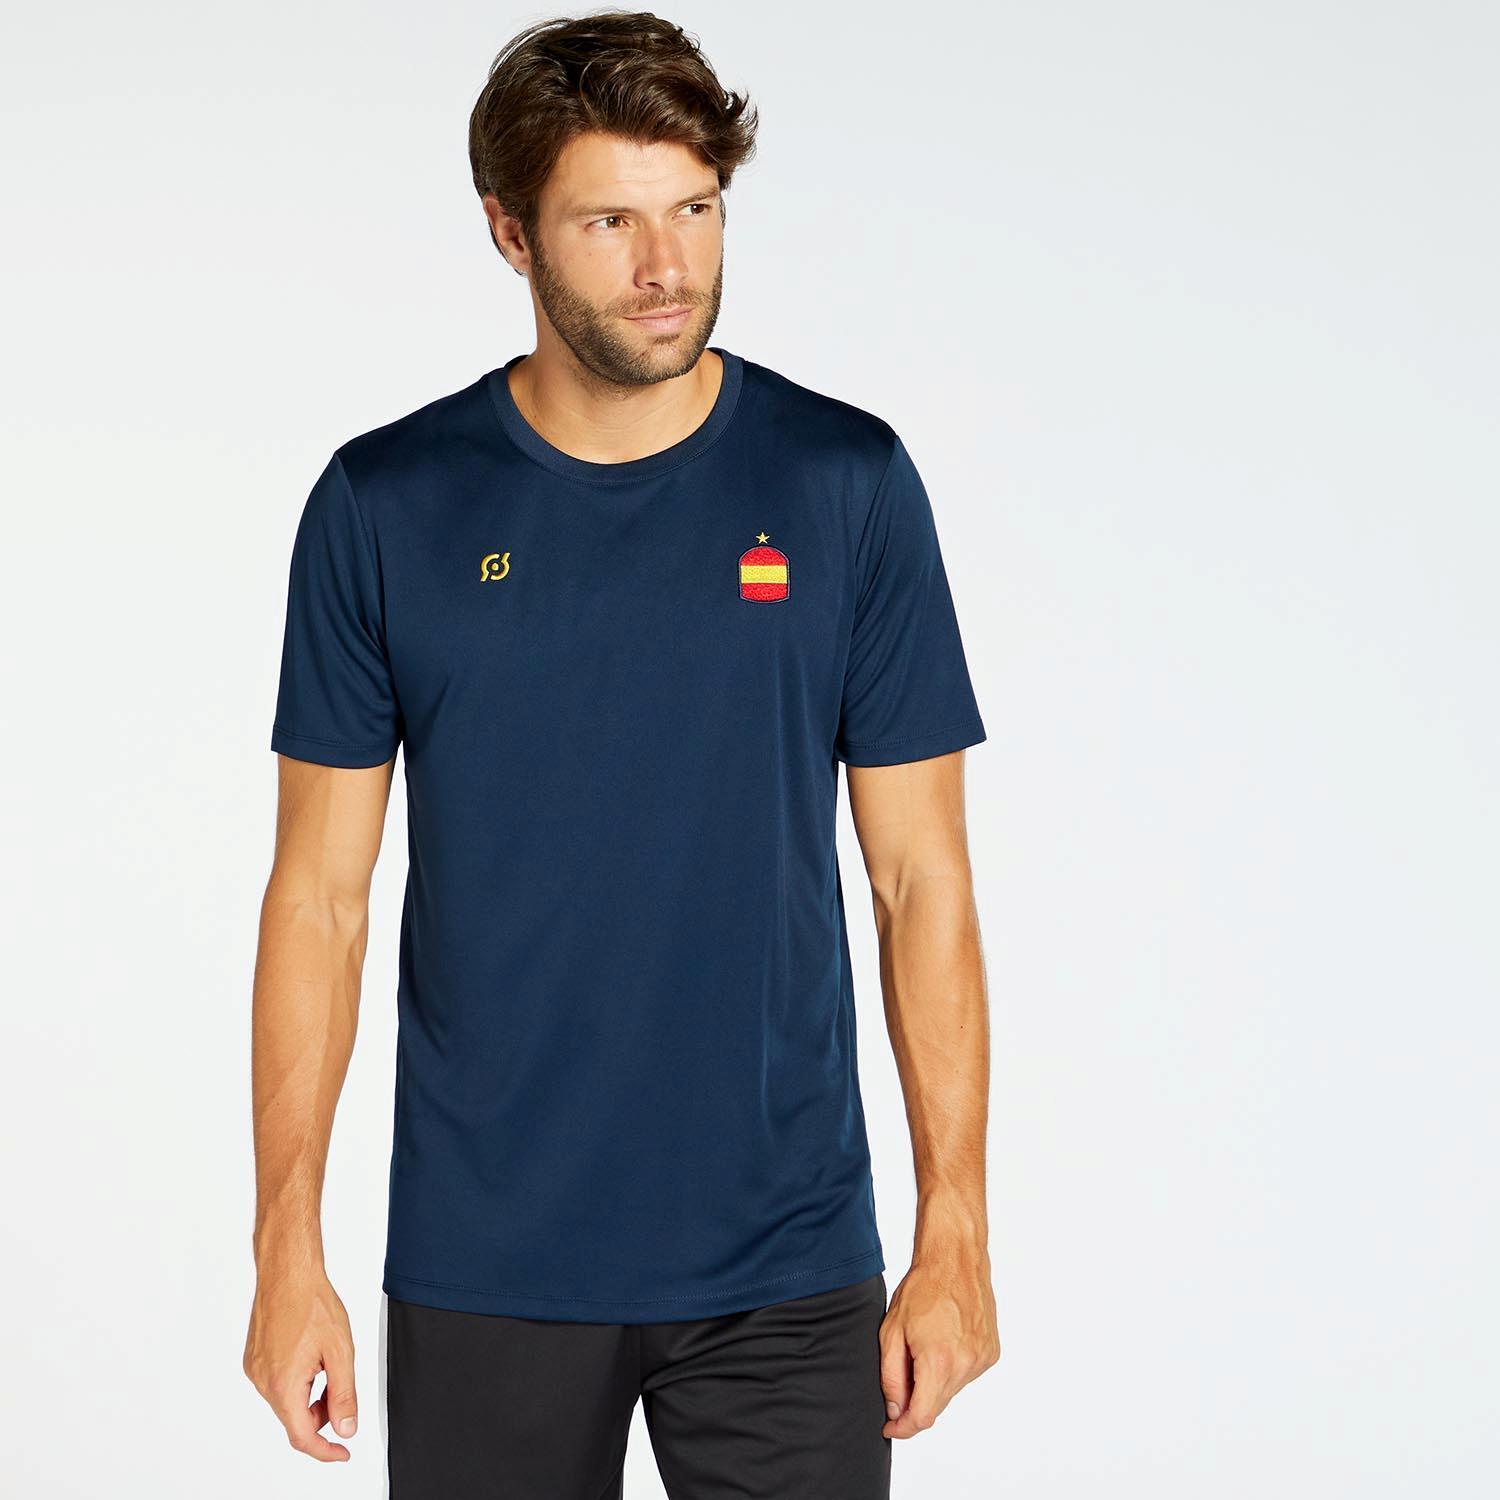 T-shirt Espagne Team Quest - Bleu - Maillot Football Homme sports taille S